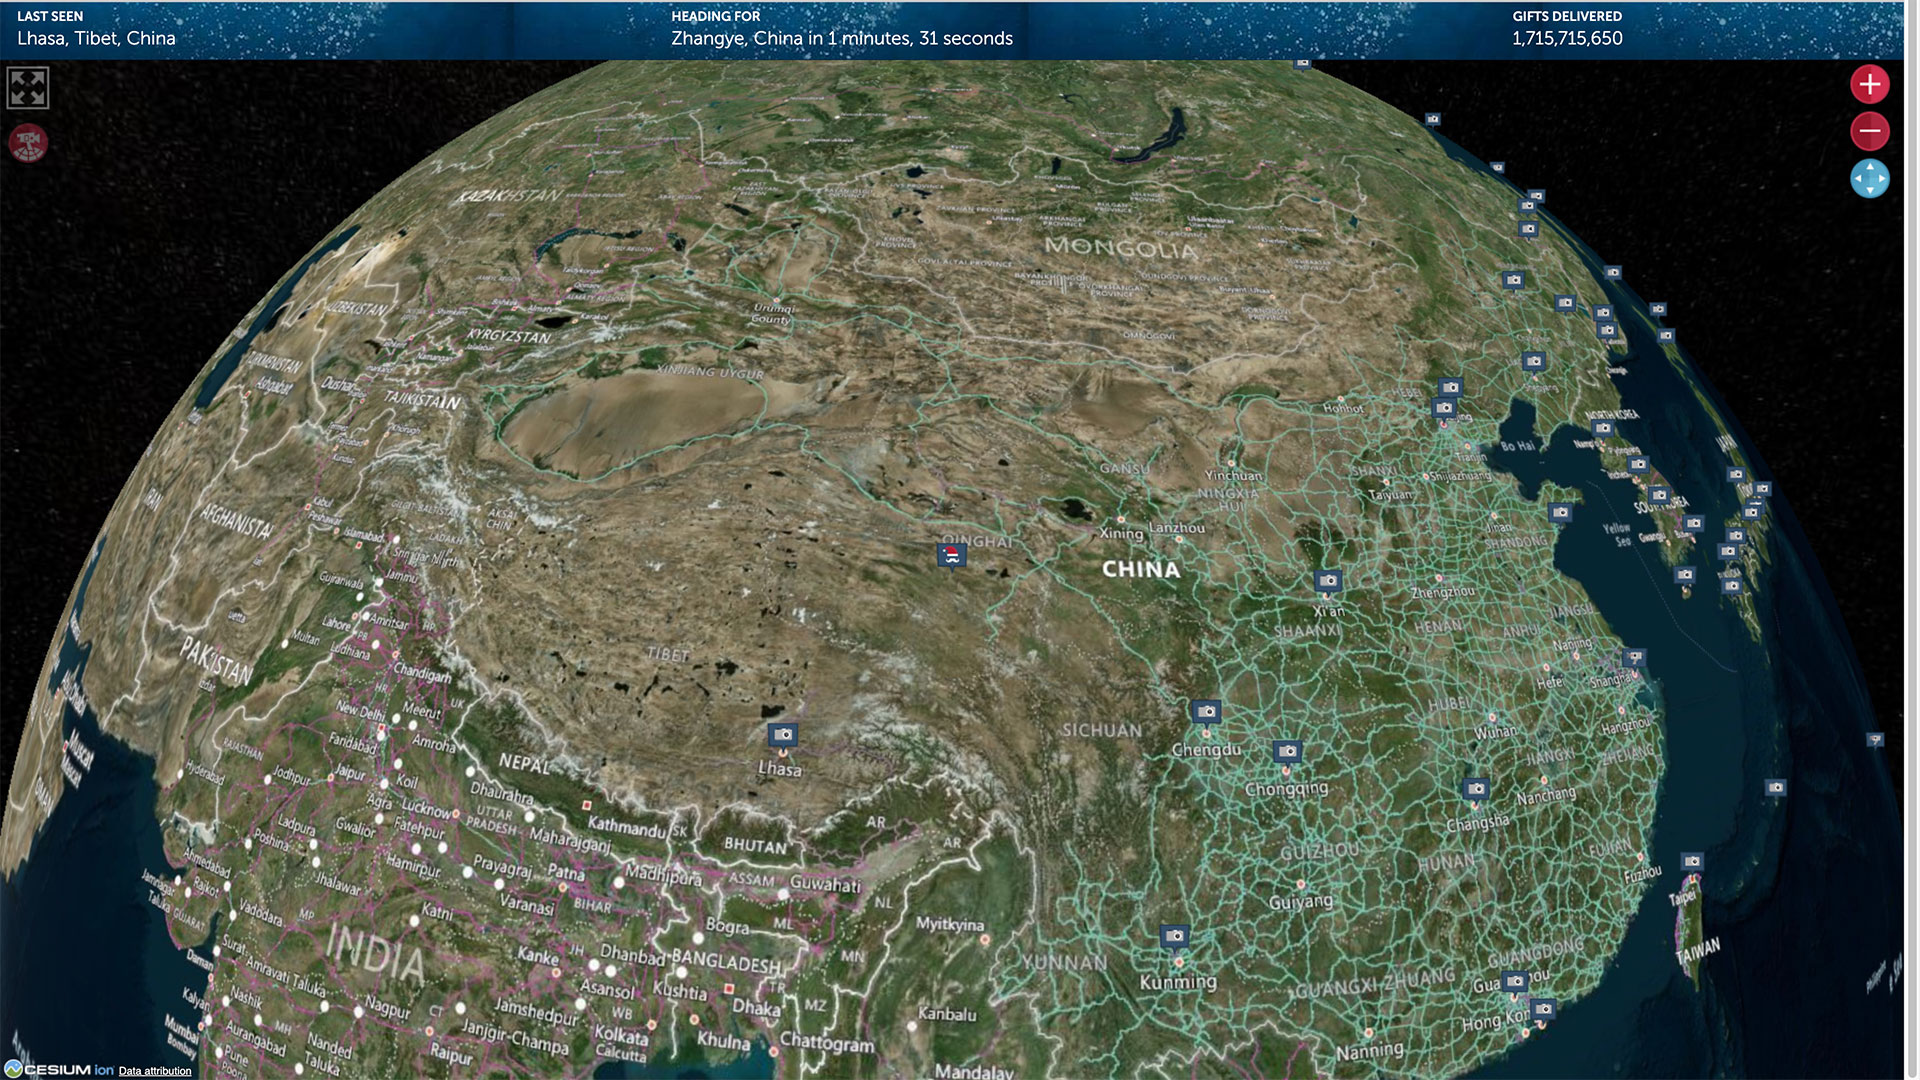 Santa tracker on NORAD showing a zoomed-out globe